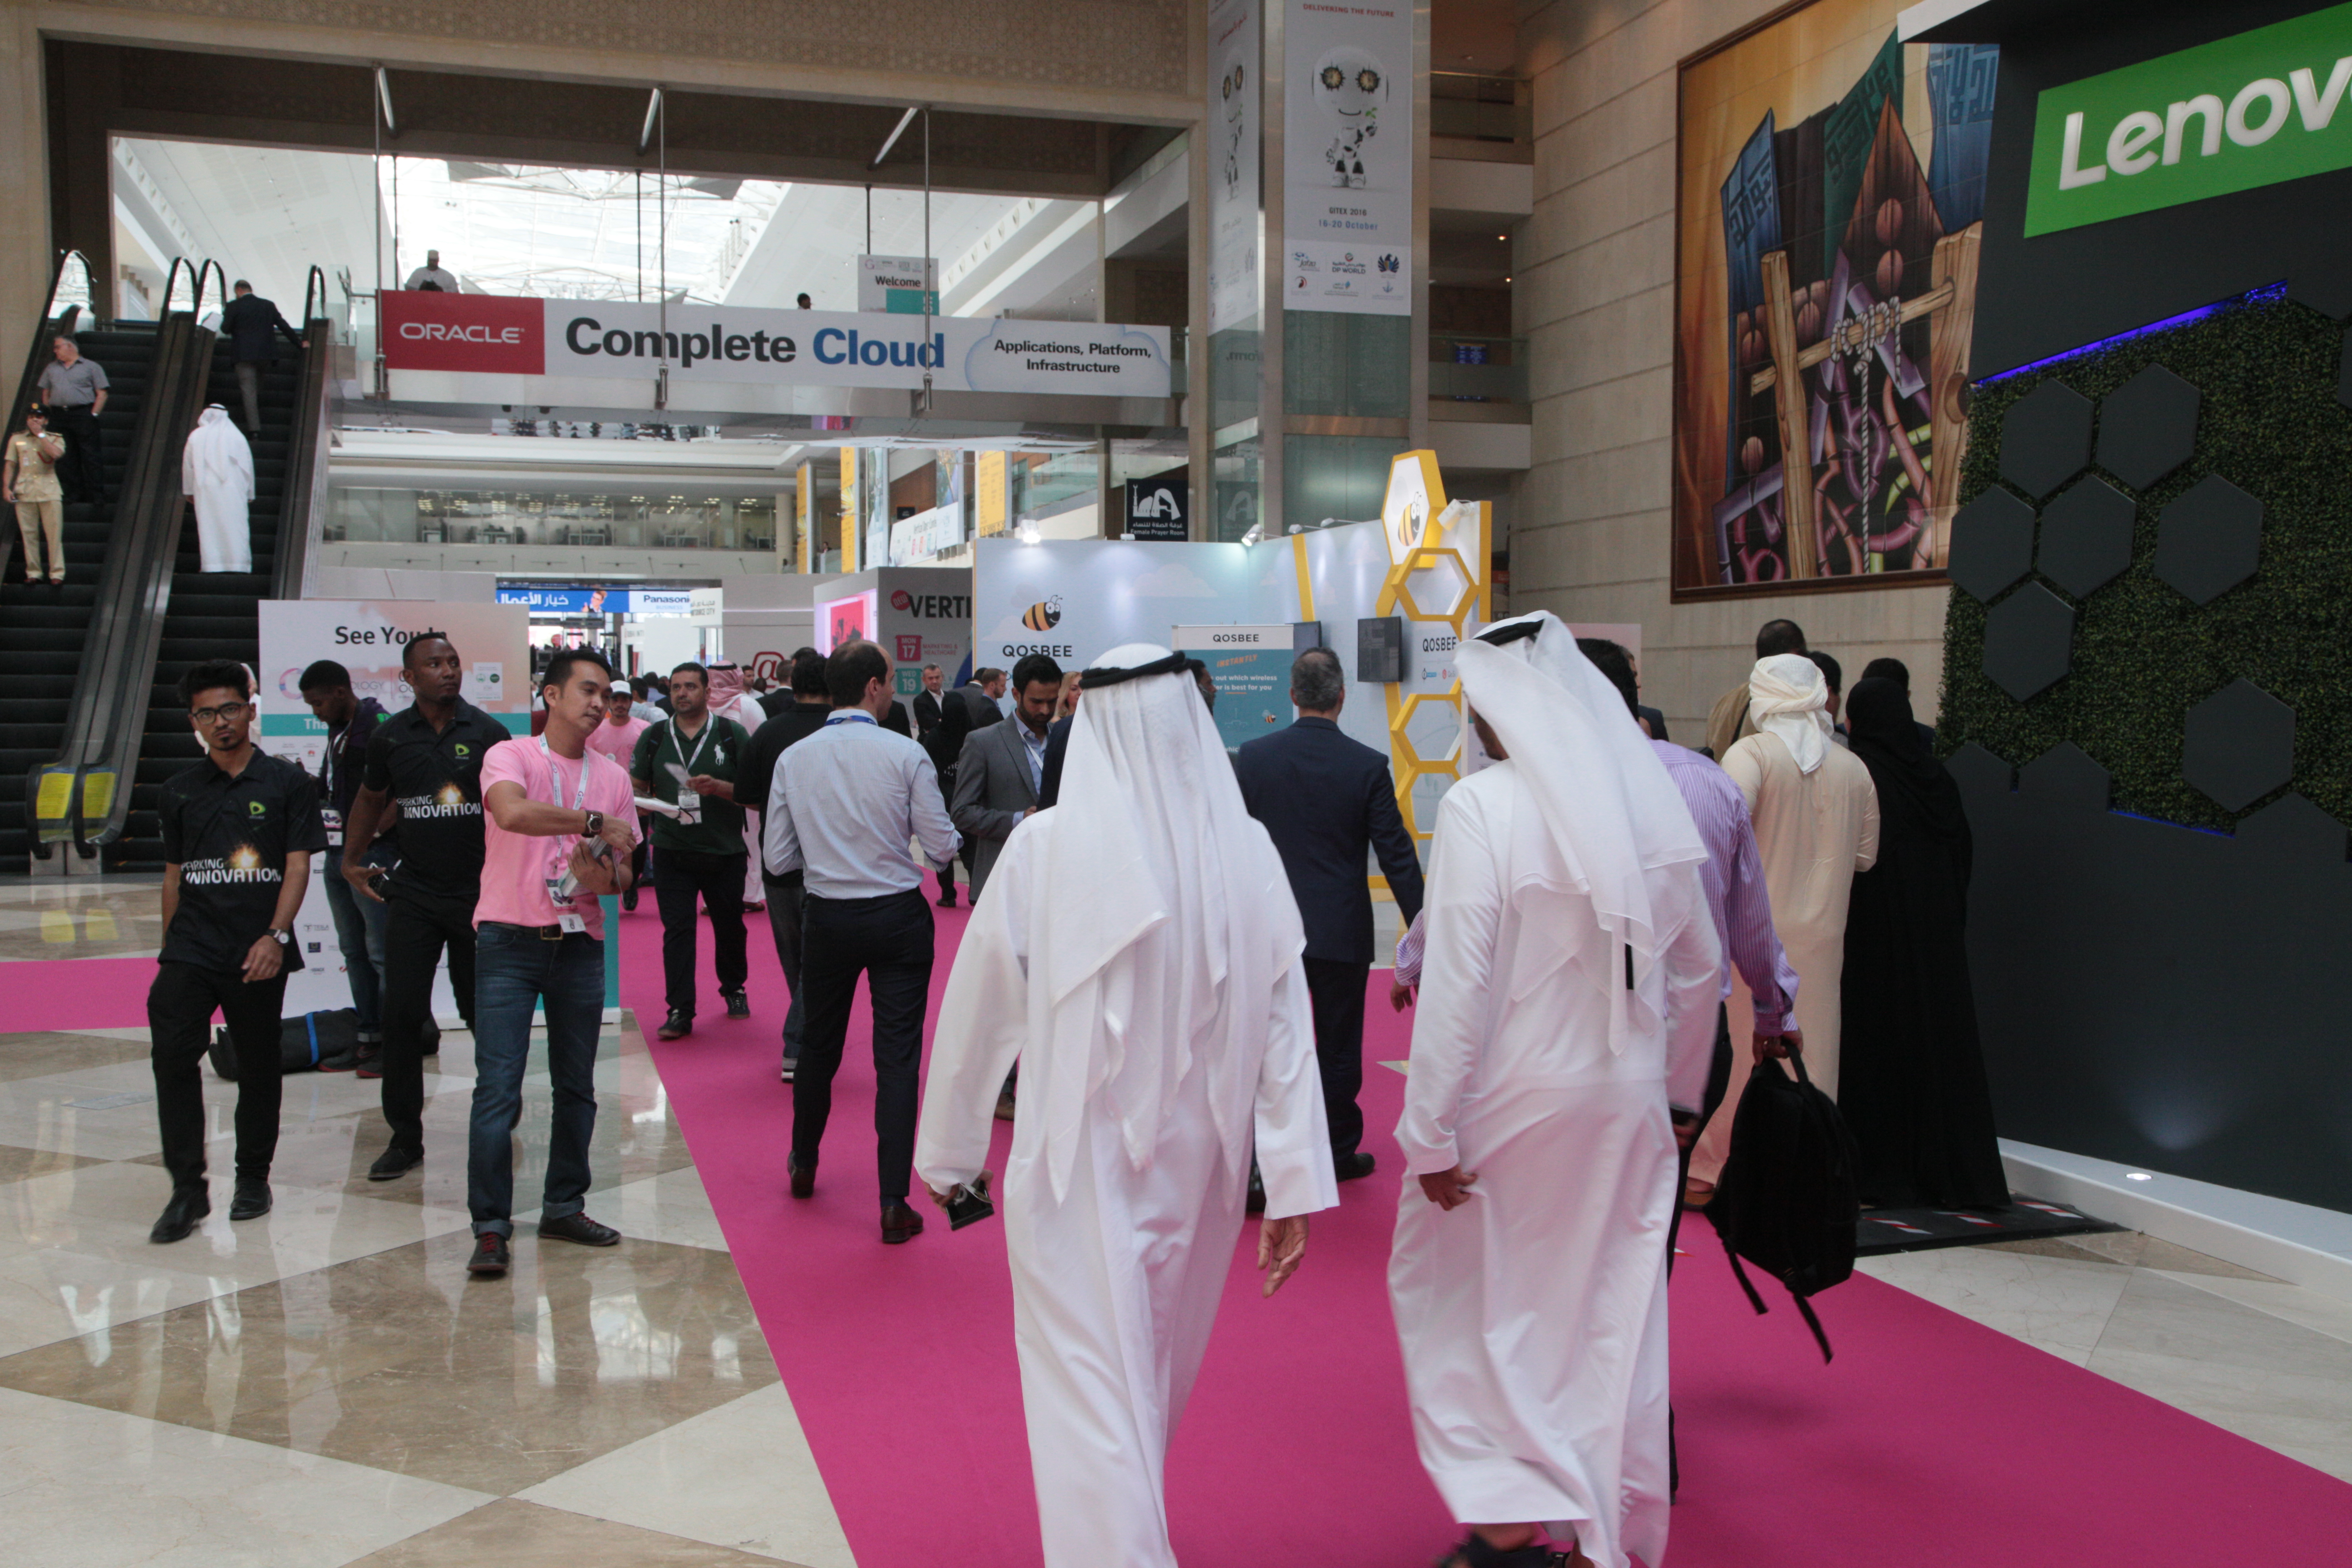 Ministry of Finance launches ‘MoF Private Cloud’ at GITEX